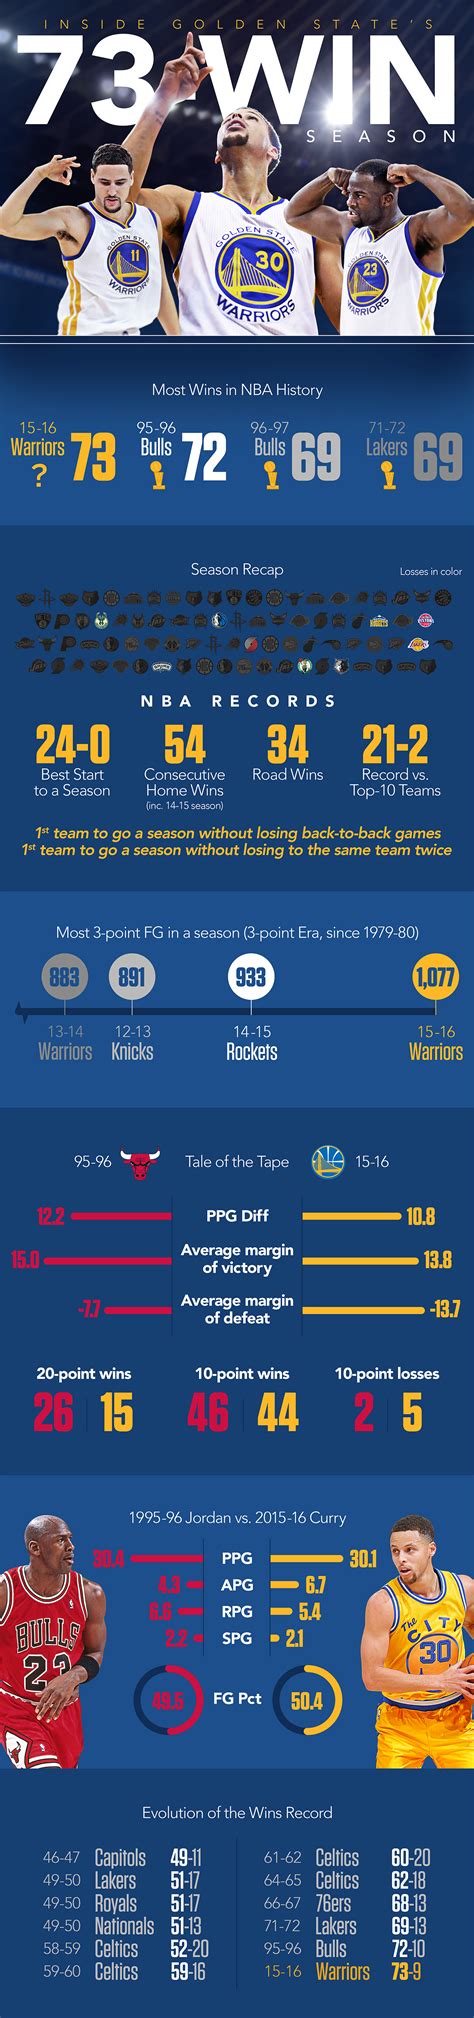 golden state warriors basketball stats today